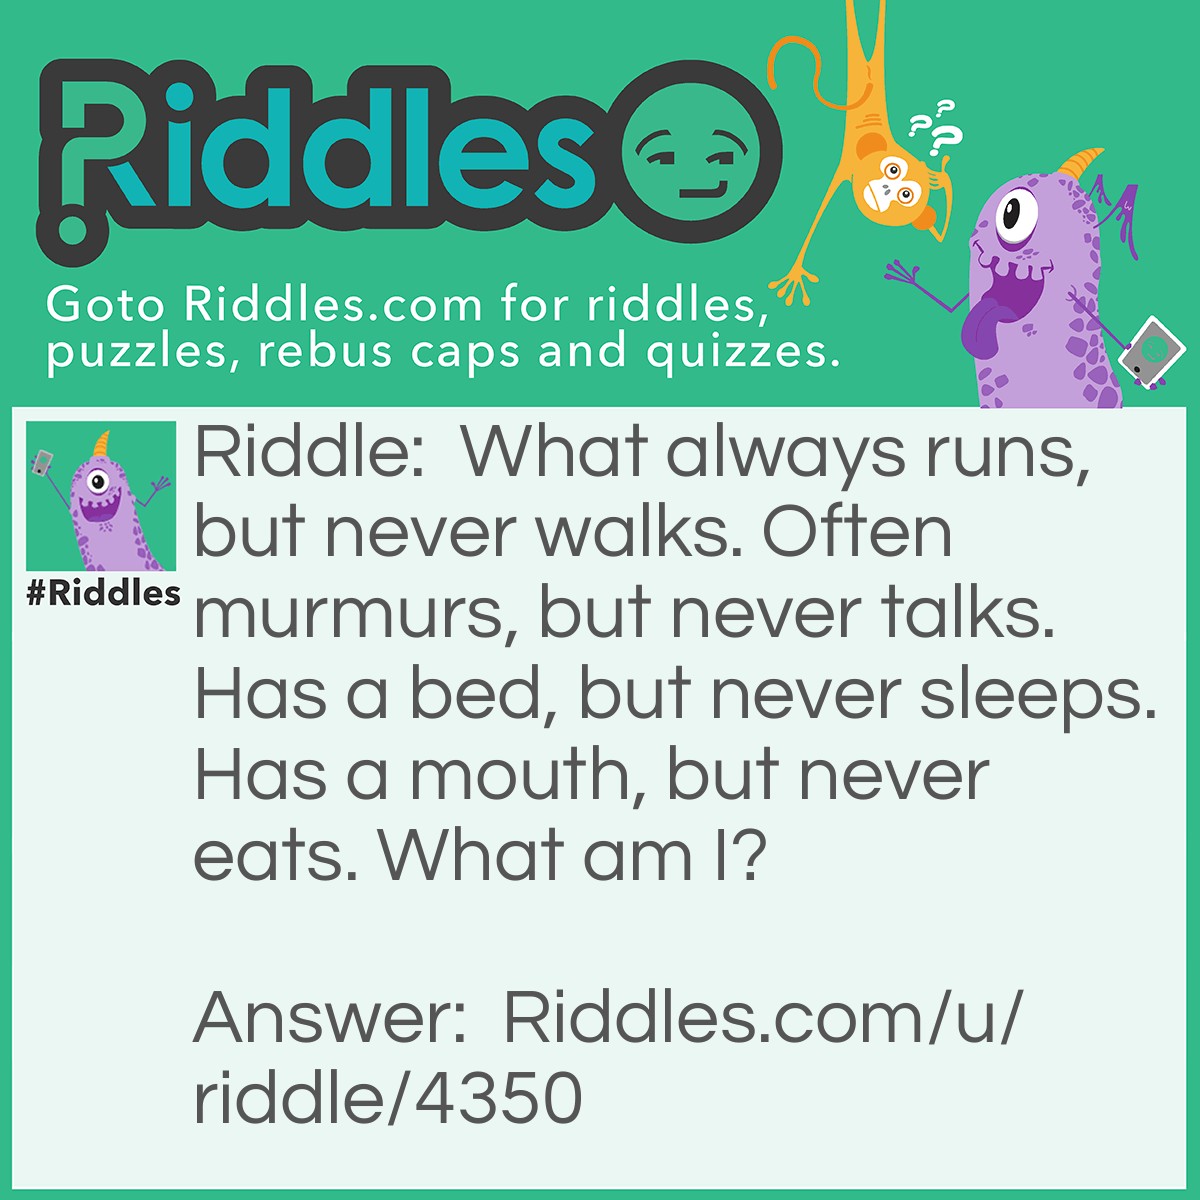 Riddle: What always runs, but never walks. Often murmurs, but never talks. Has a bed, but never sleeps. Has a mouth, but never eats. What am I? Answer: A river.